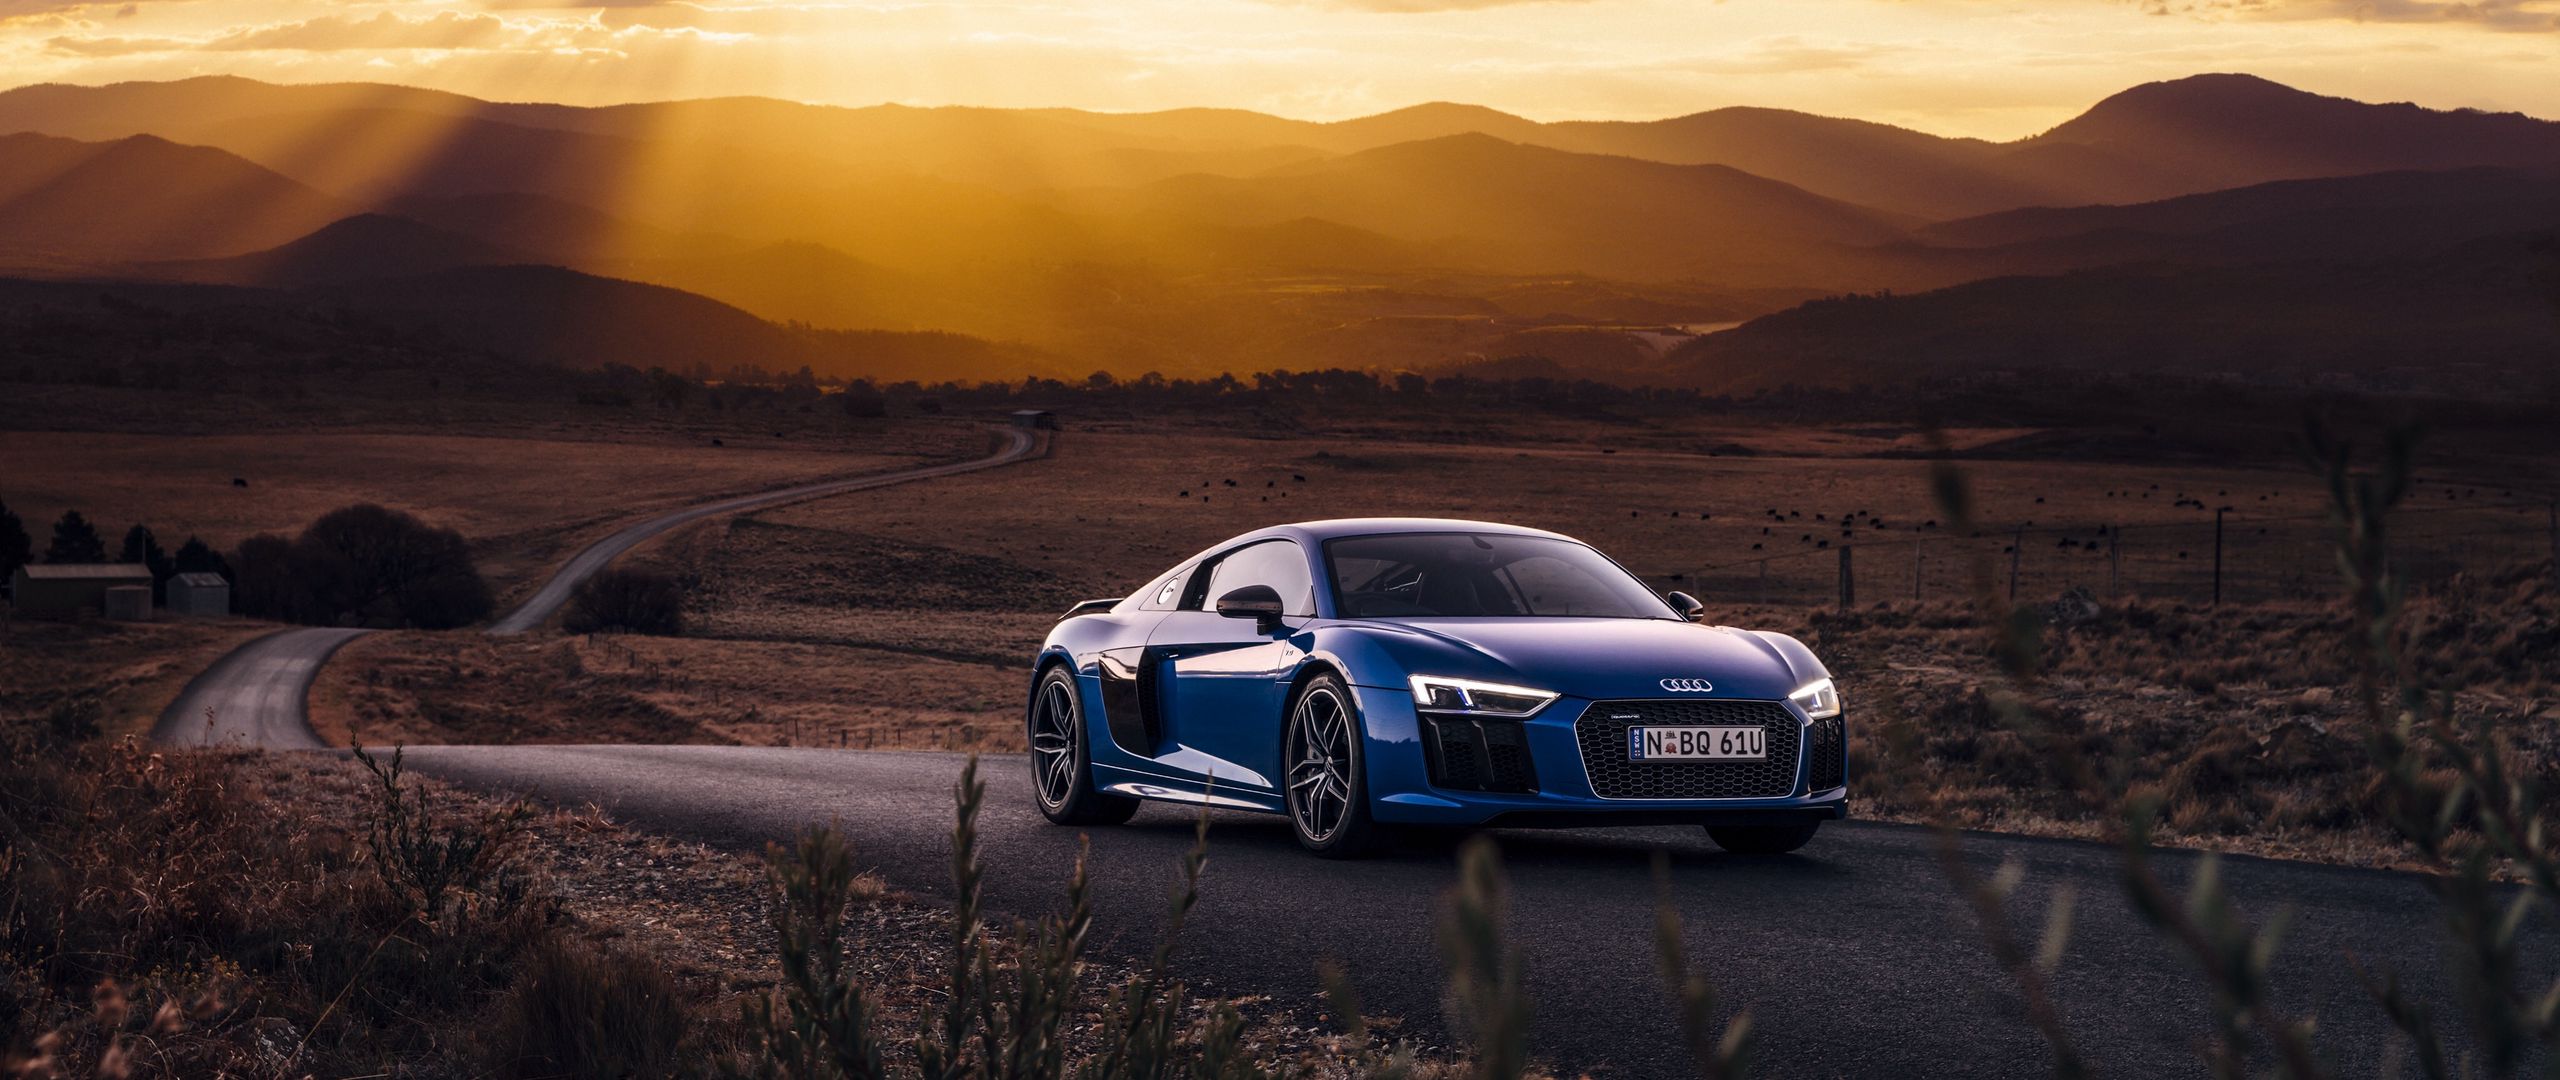 Download Wallpaper 2560x1080 Audi R8 V10 Side View Road Dual Wide 1080p Hd Background